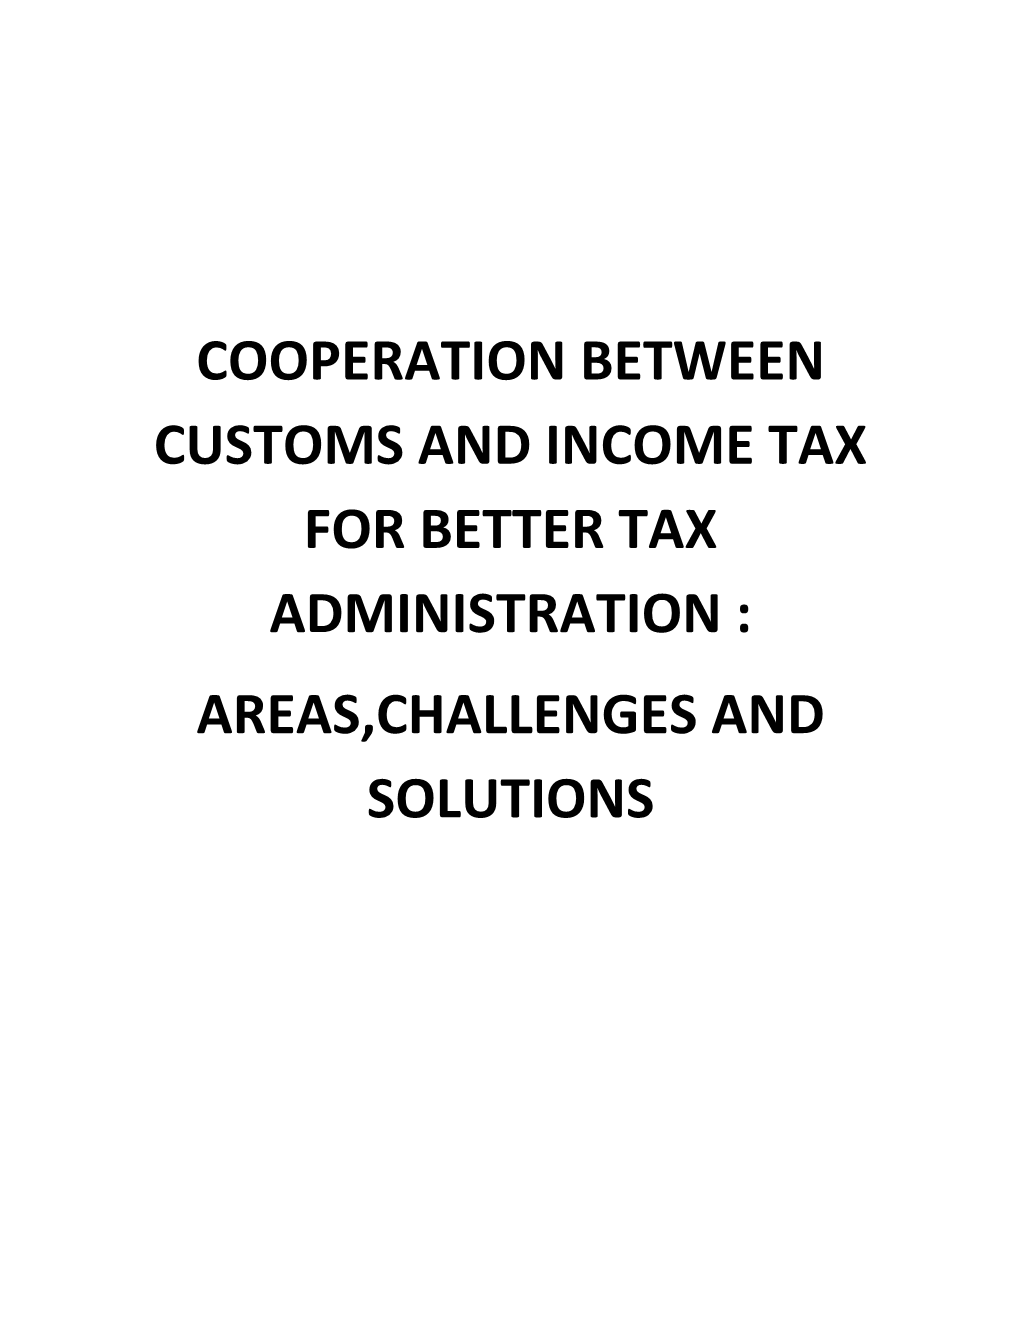 Cooperation Between Customs and Income Tax for Better Tax Administration : Areas,Challenges and Solutions